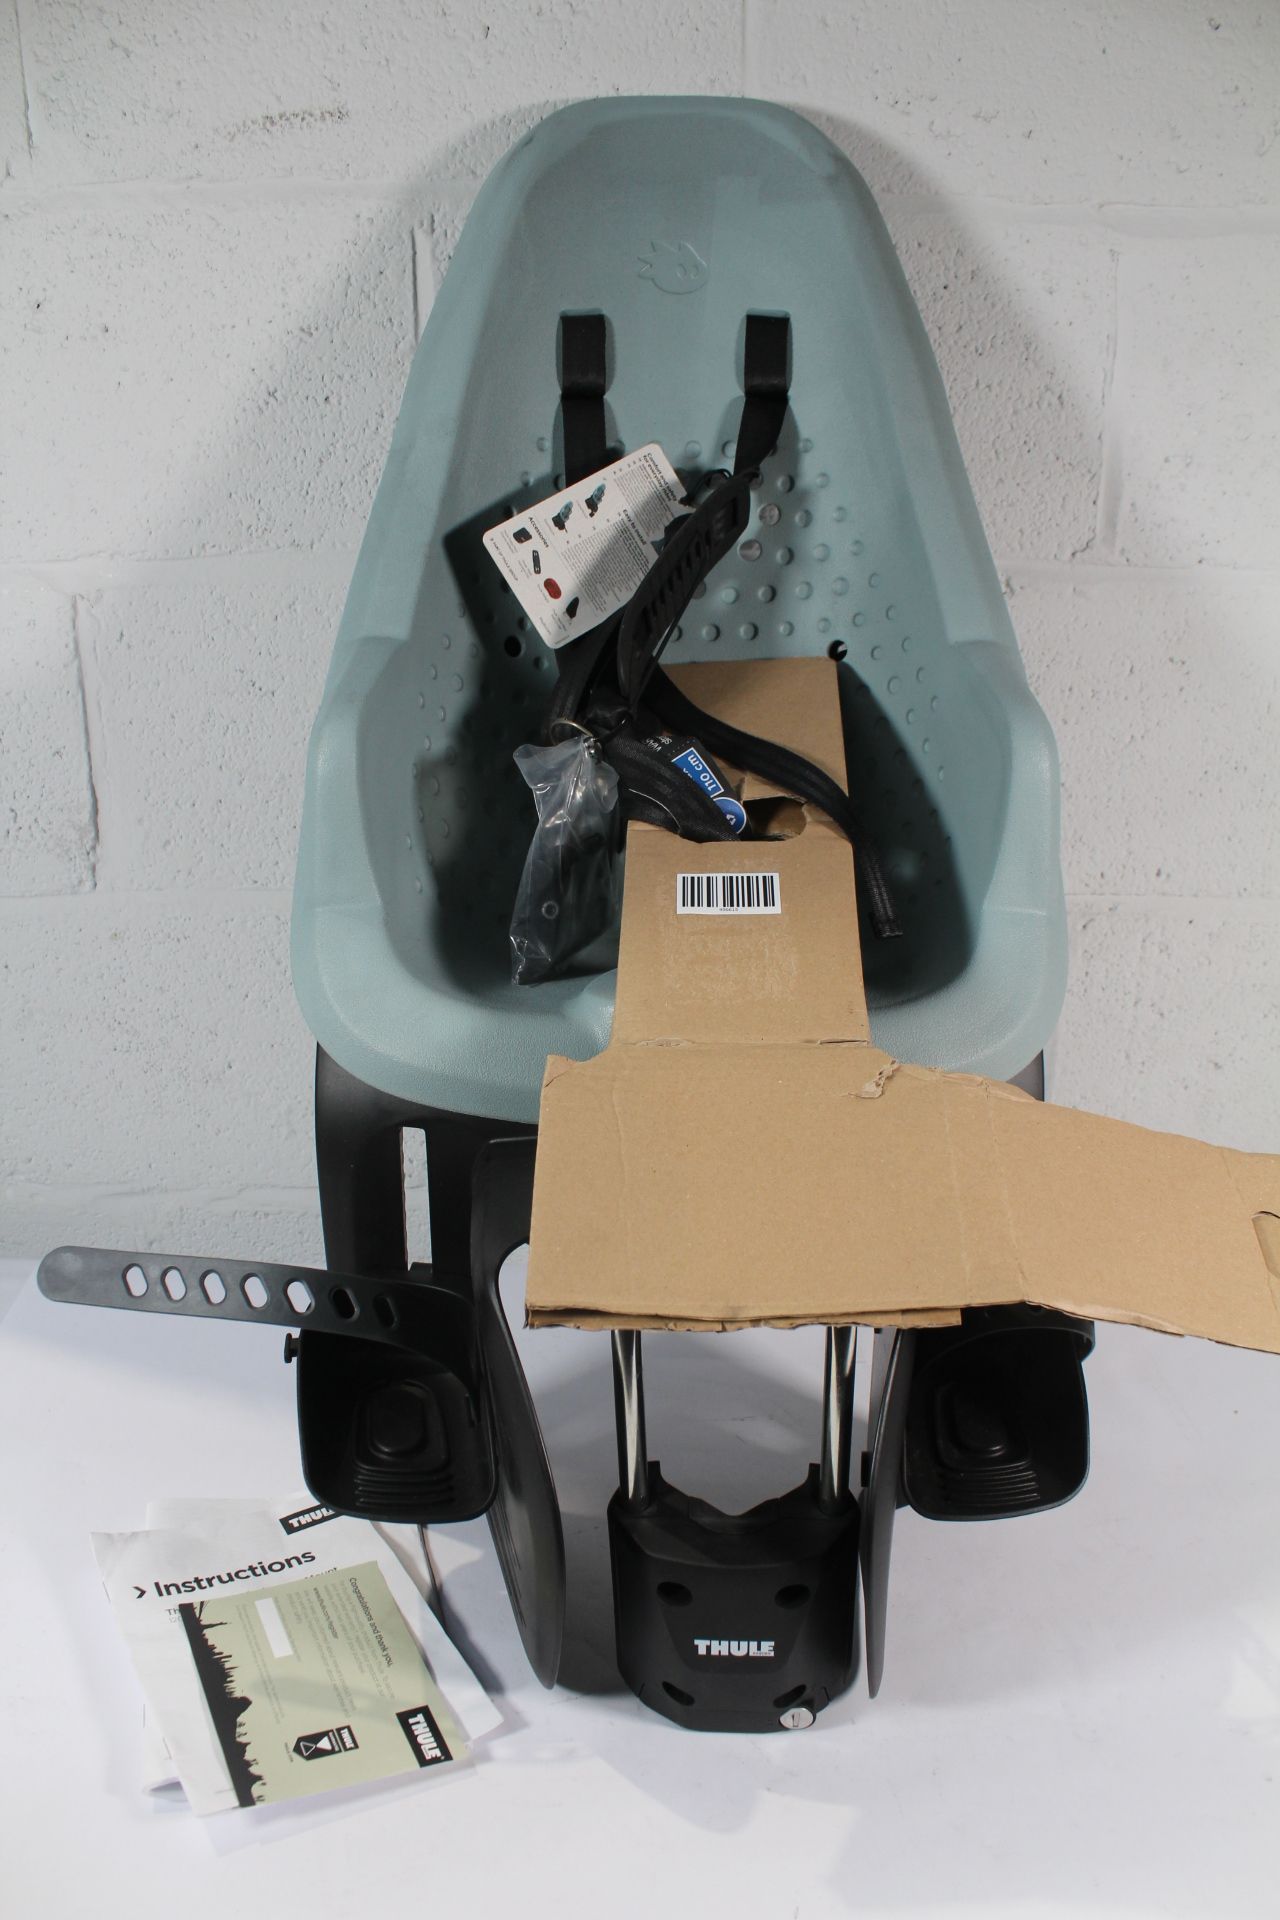 Thule Yepp 2 Maxi Frame Mount Alaska Child Bike Seat (Viewing recommended).